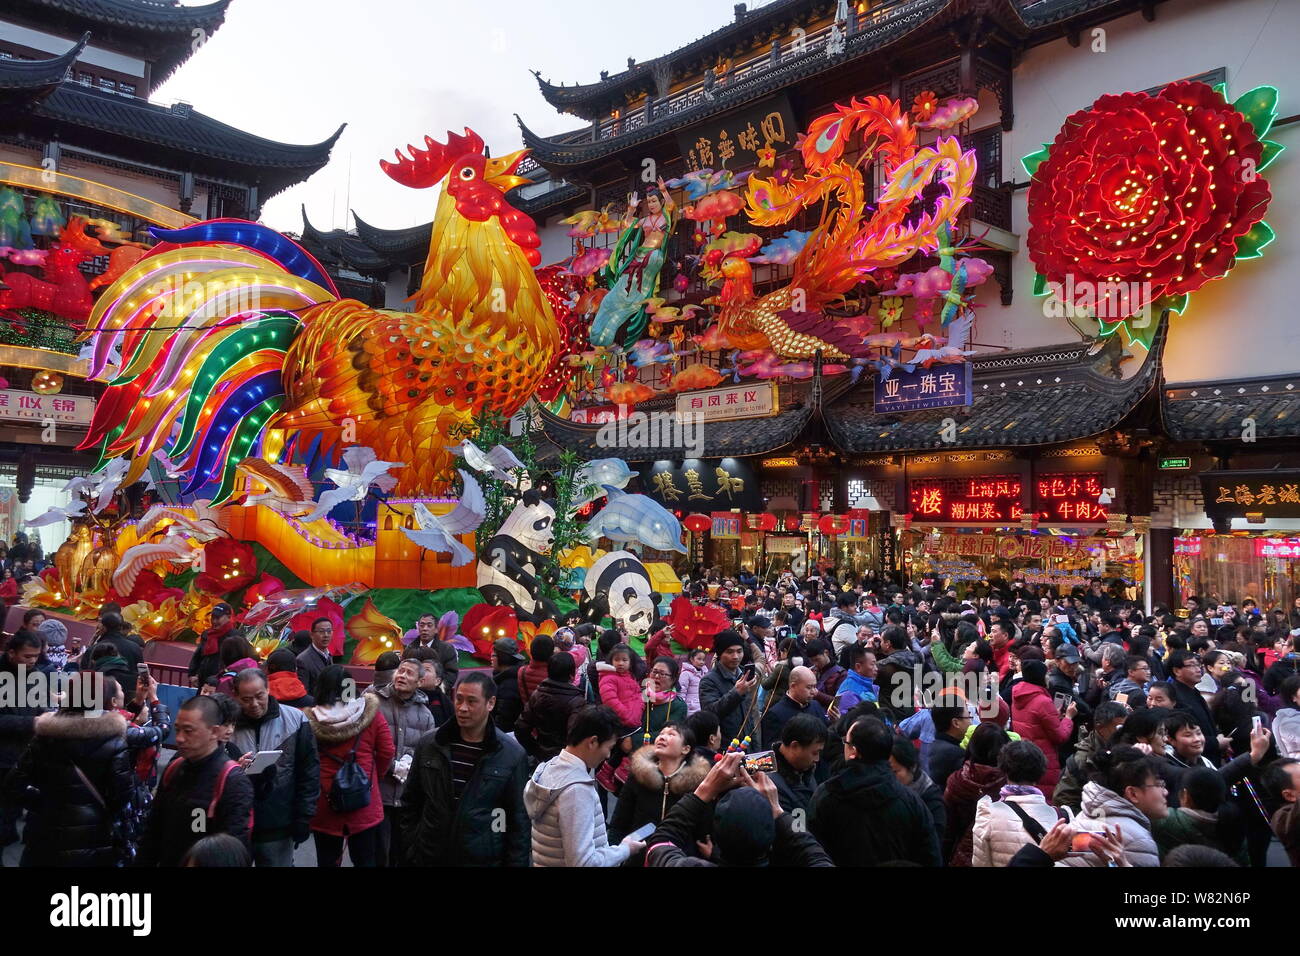 Tourists Crowd Yu Garden Or Yuyuan Garden During The Spring Festival Or Chinese New Year Year Of The Rooster In Shanghai China 31 January 17 Stock Photo Alamy